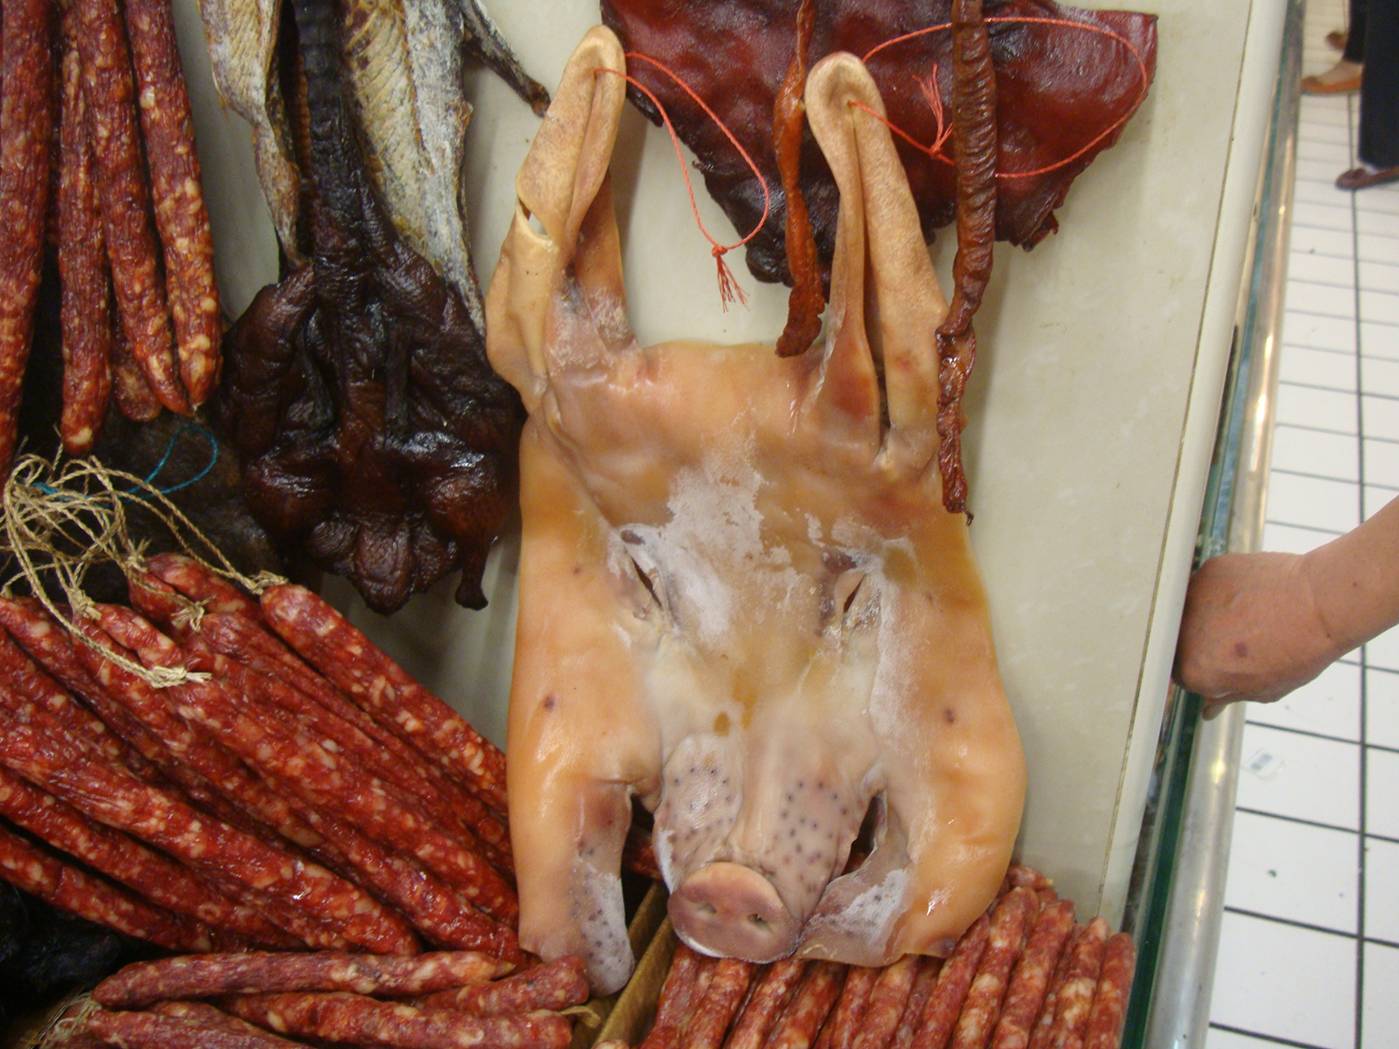 Picture:  A pig's face in the meat market.  The kind of thing that foreigners find hideous, like "Silence of the Lambs" has come to the world of pork.  Wuxi, China